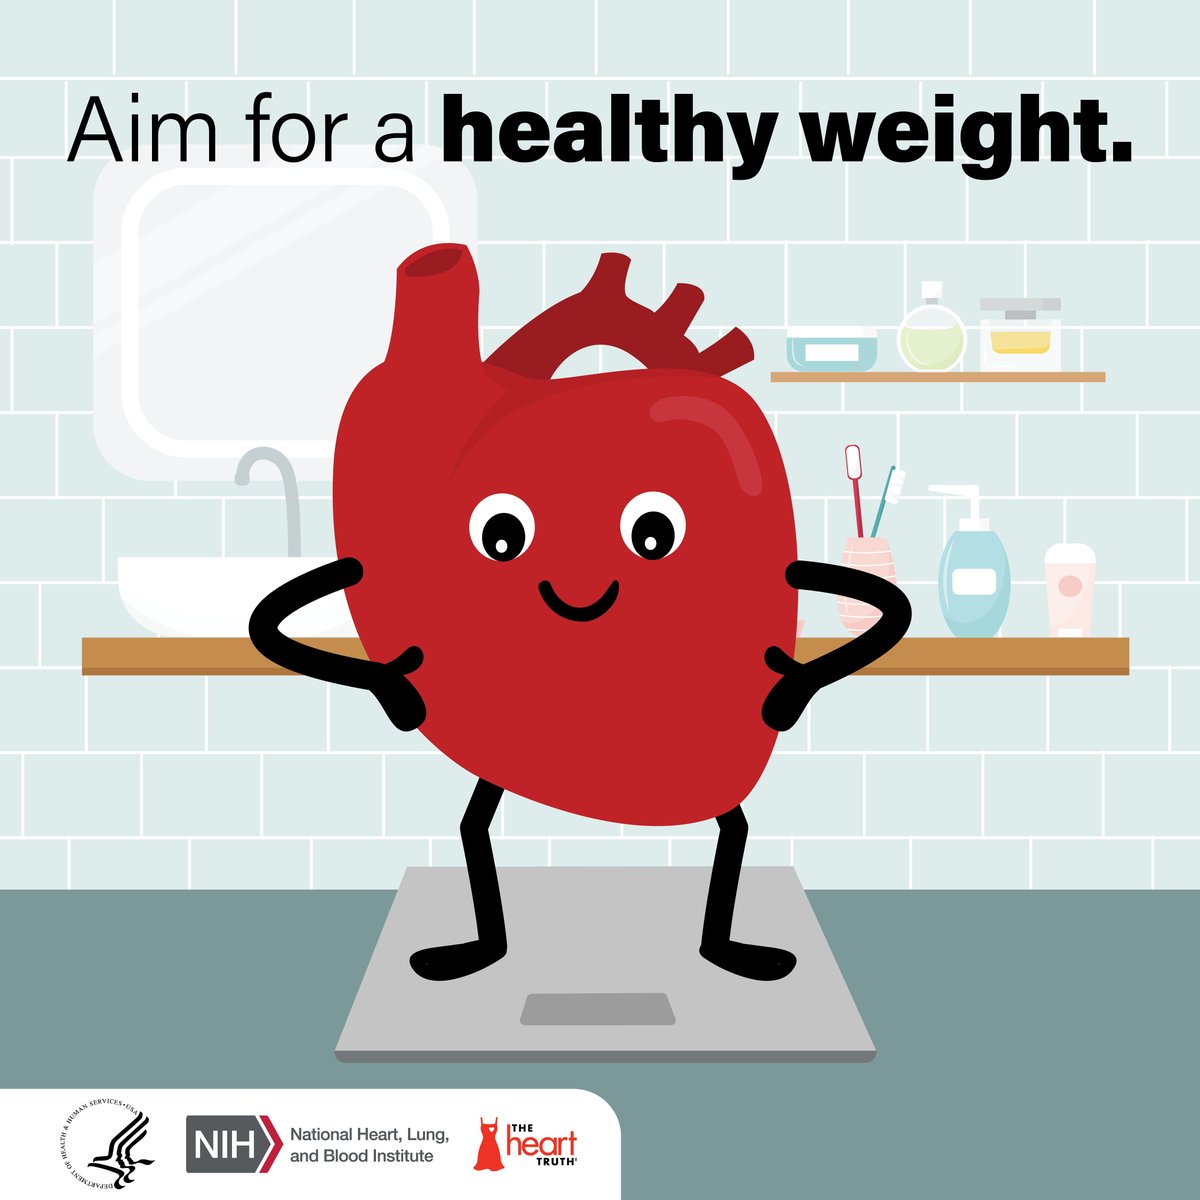 Be smart about #OurHearts! Maintaining a healthy weight is important for your heart and overall health. Small actions—like making healthier food choices, moving more, reducing stress, or getting enough sleep—can help. Learn how: go.nih.gov/B9Wq7gi